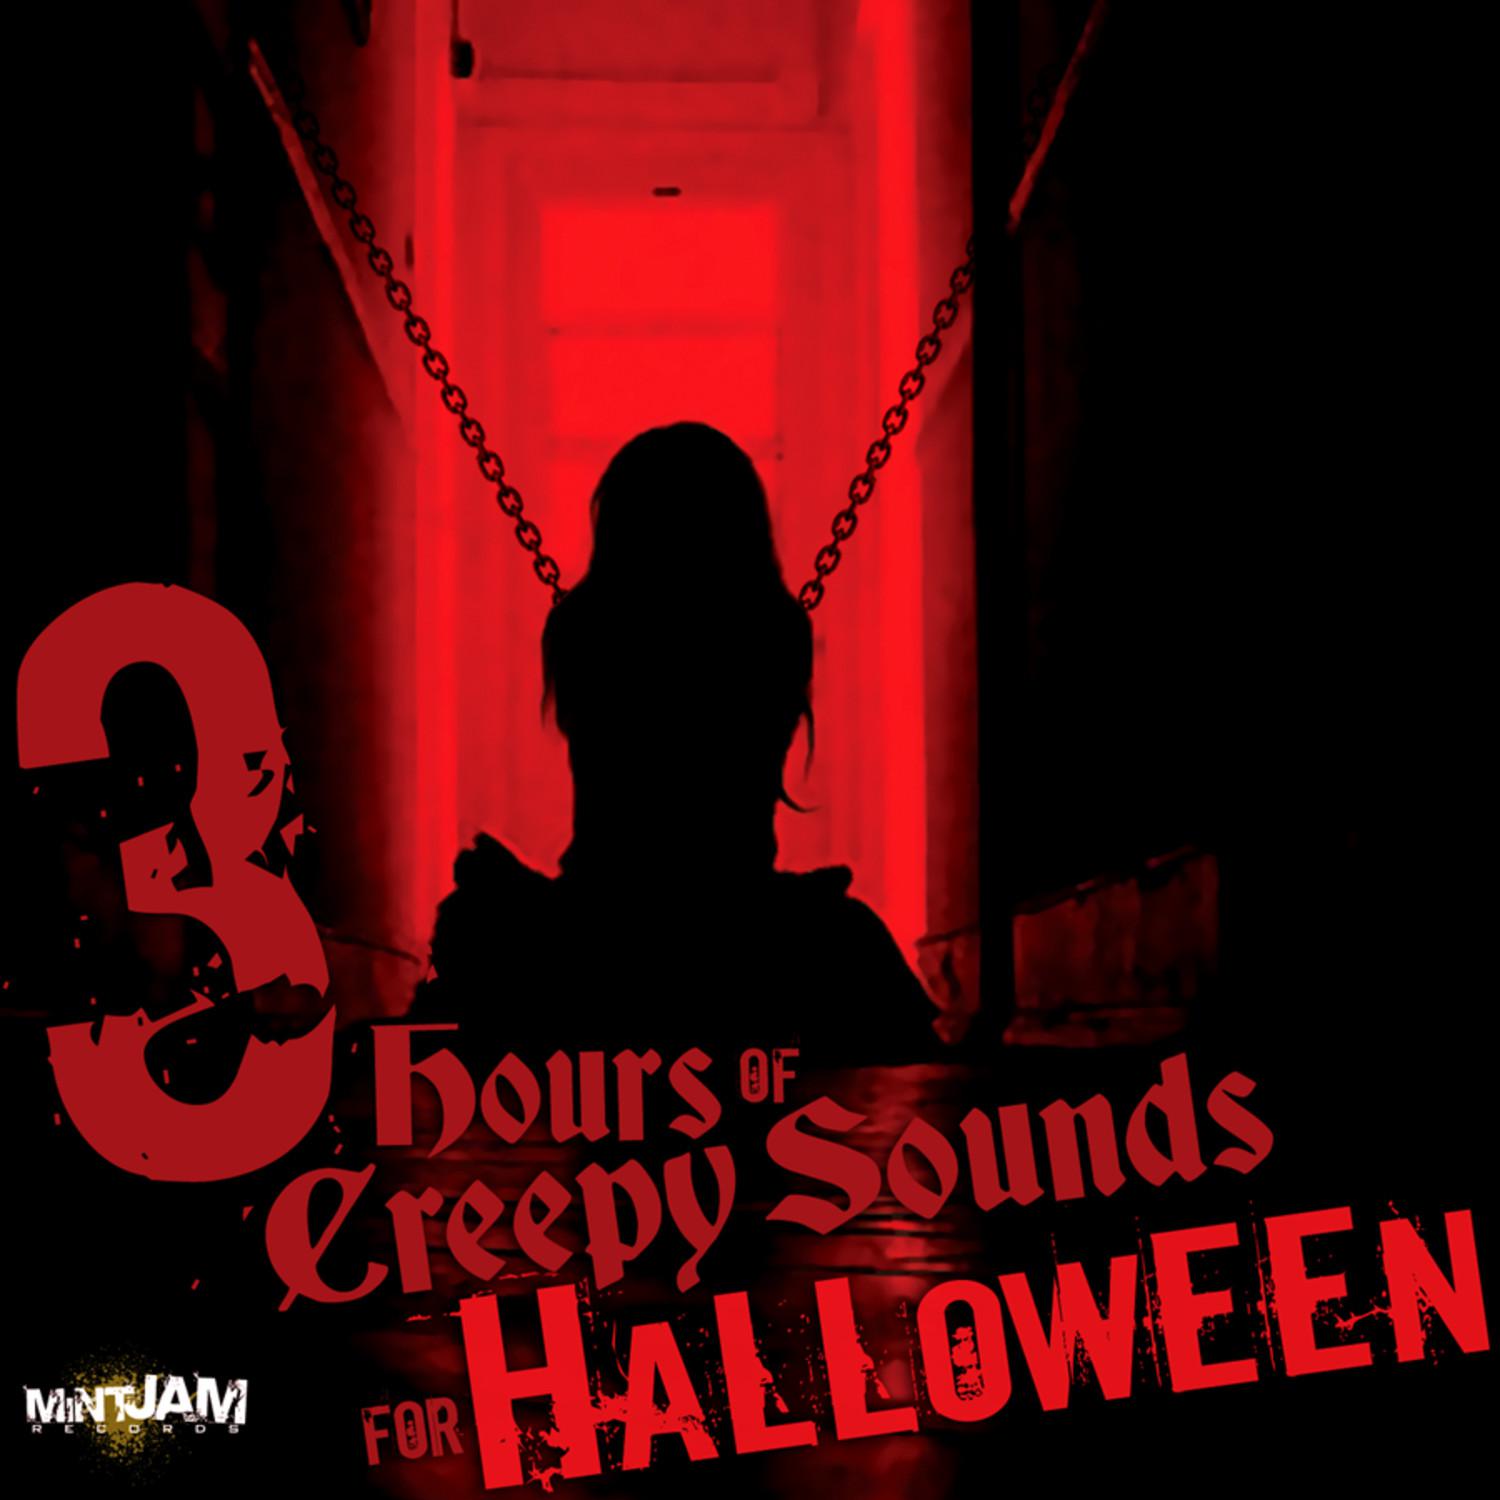 3 Hours of Creepy Sounds for Halloween